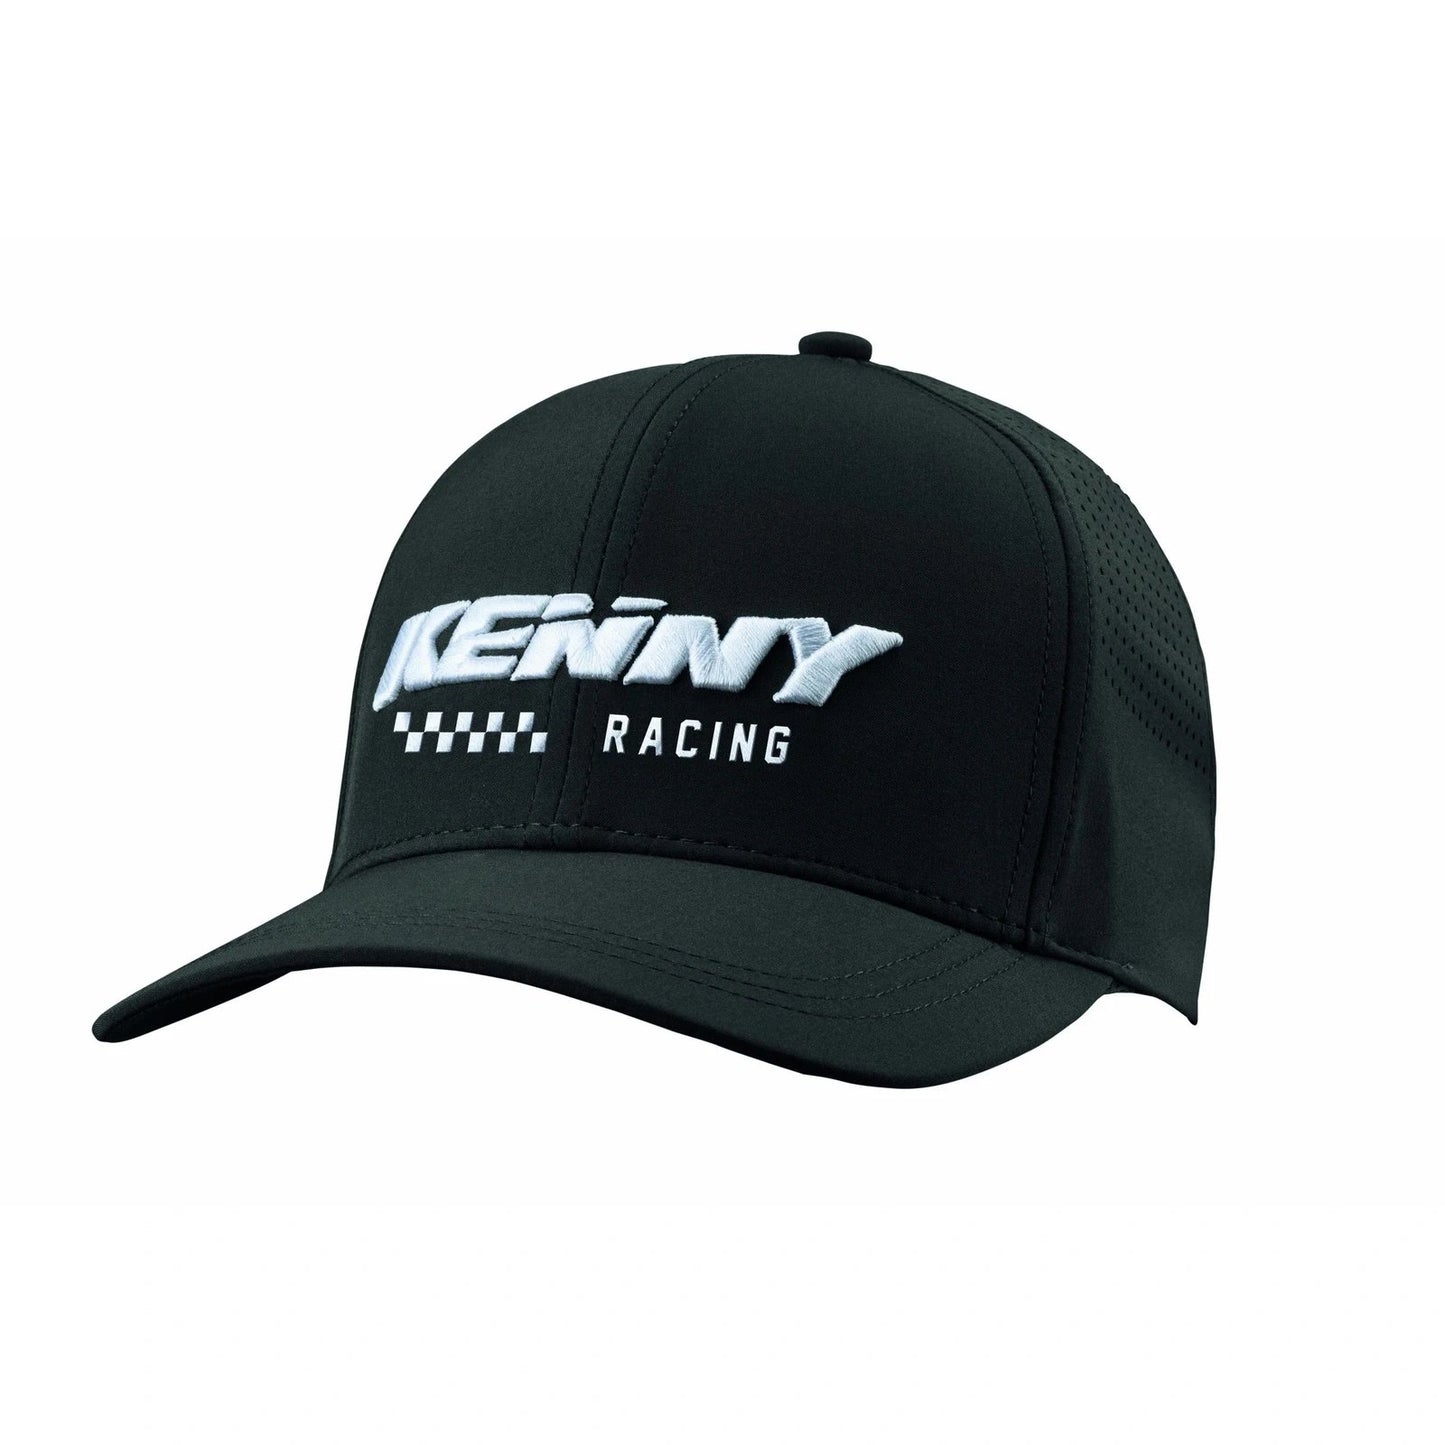 Kenny Core Black Cap - Stylish Hat For Men And Women